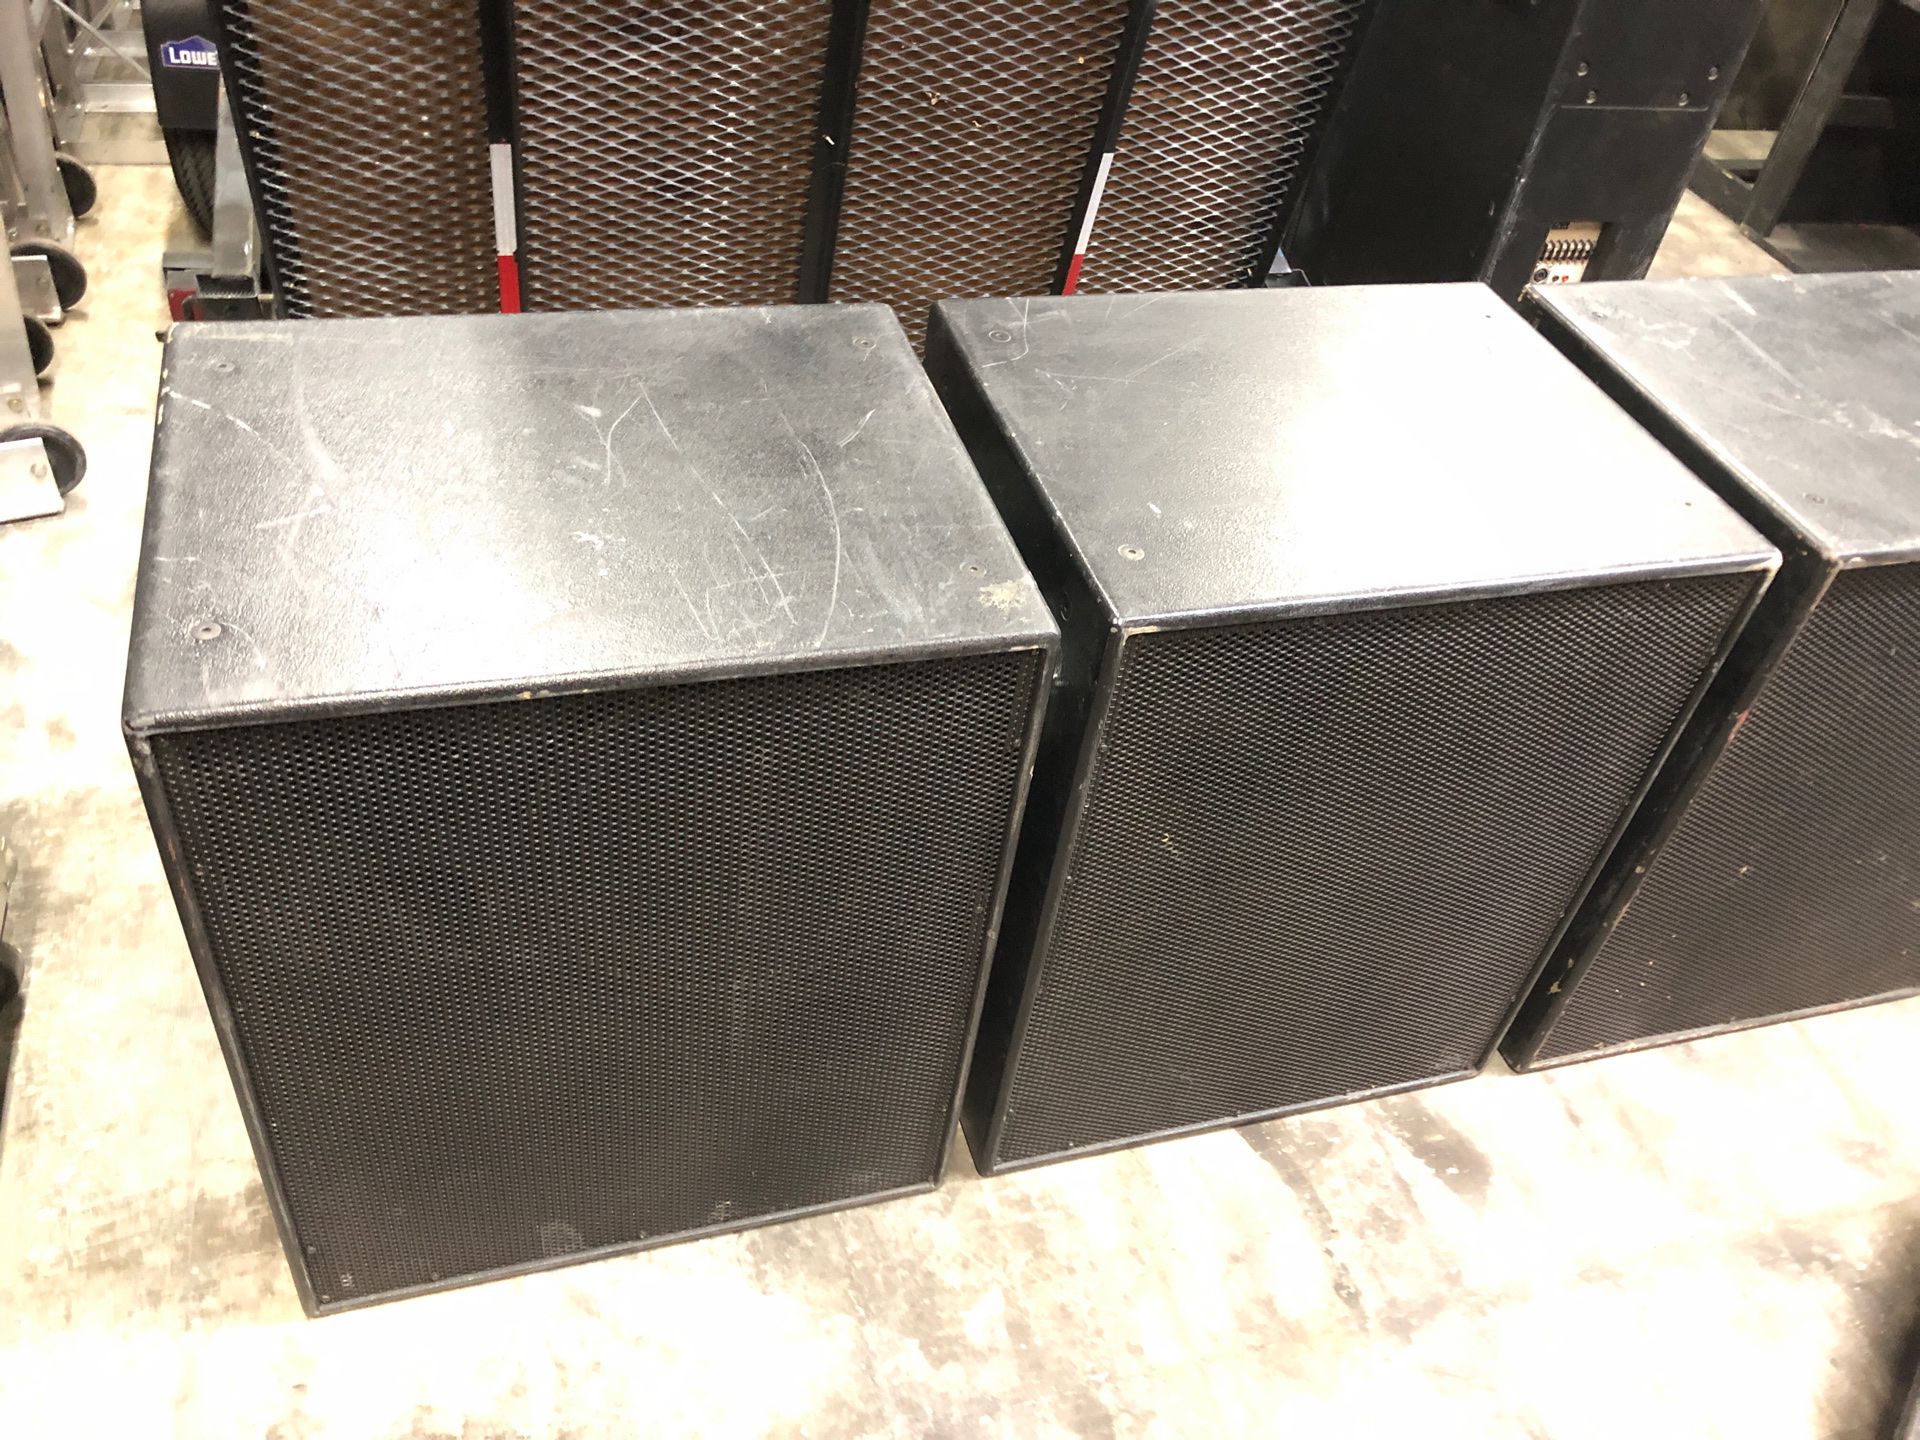 EAW SB250 dual 15” subwoofers with nl-4 or terminal connections